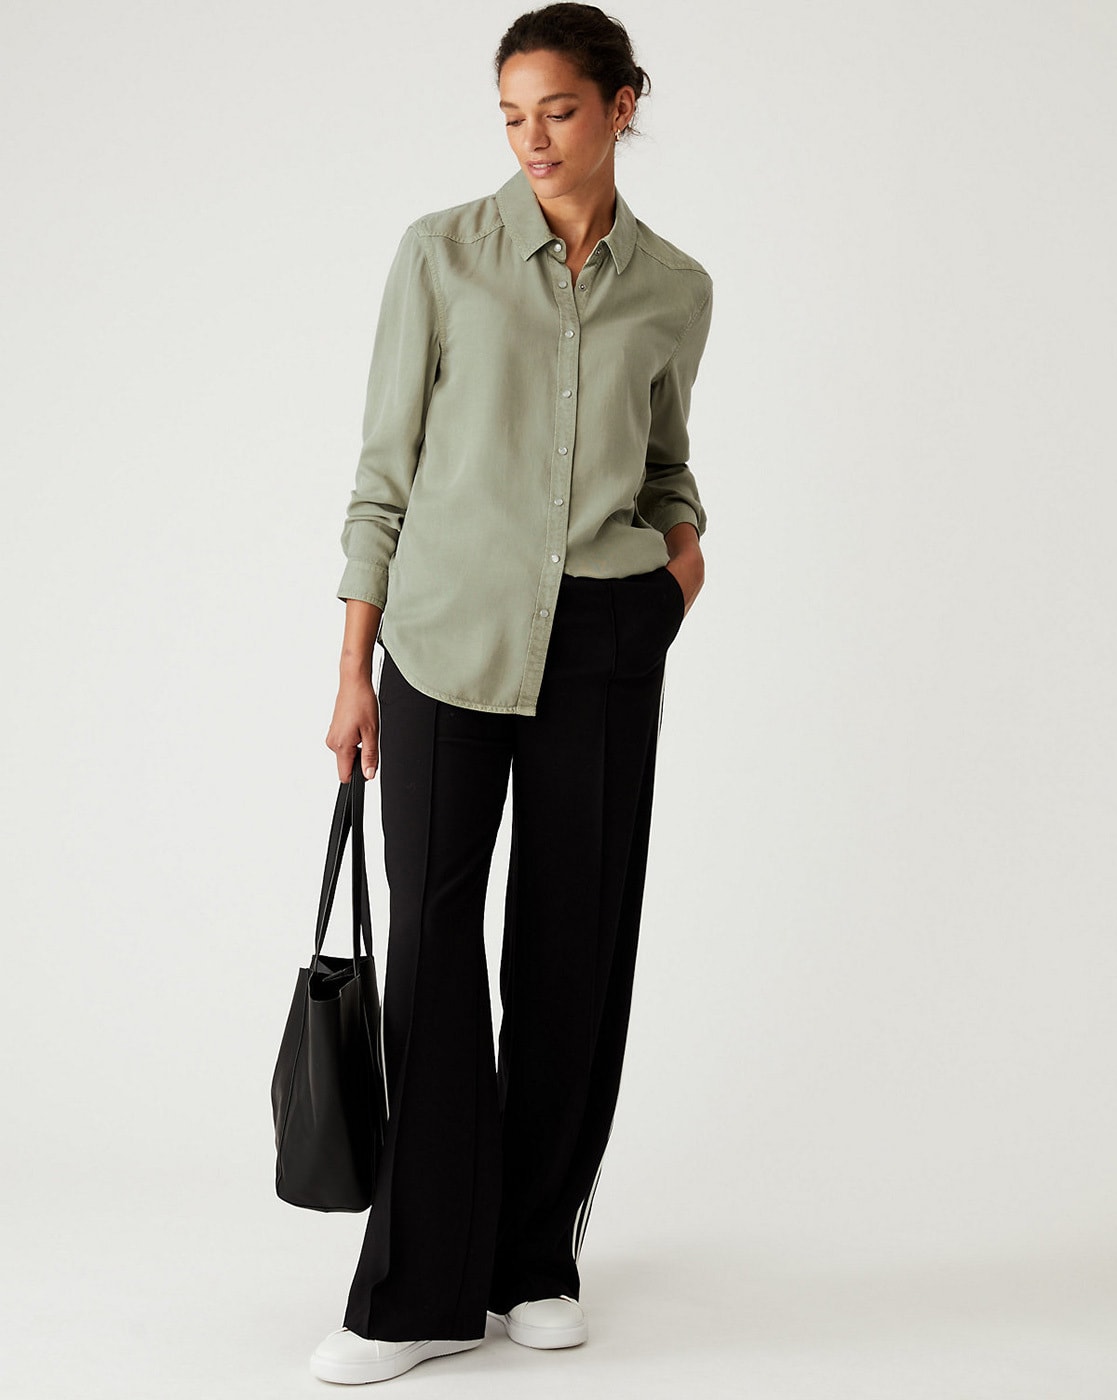 Buy Olive Shirts for Women by Marks & Spencer Online | Ajio.com